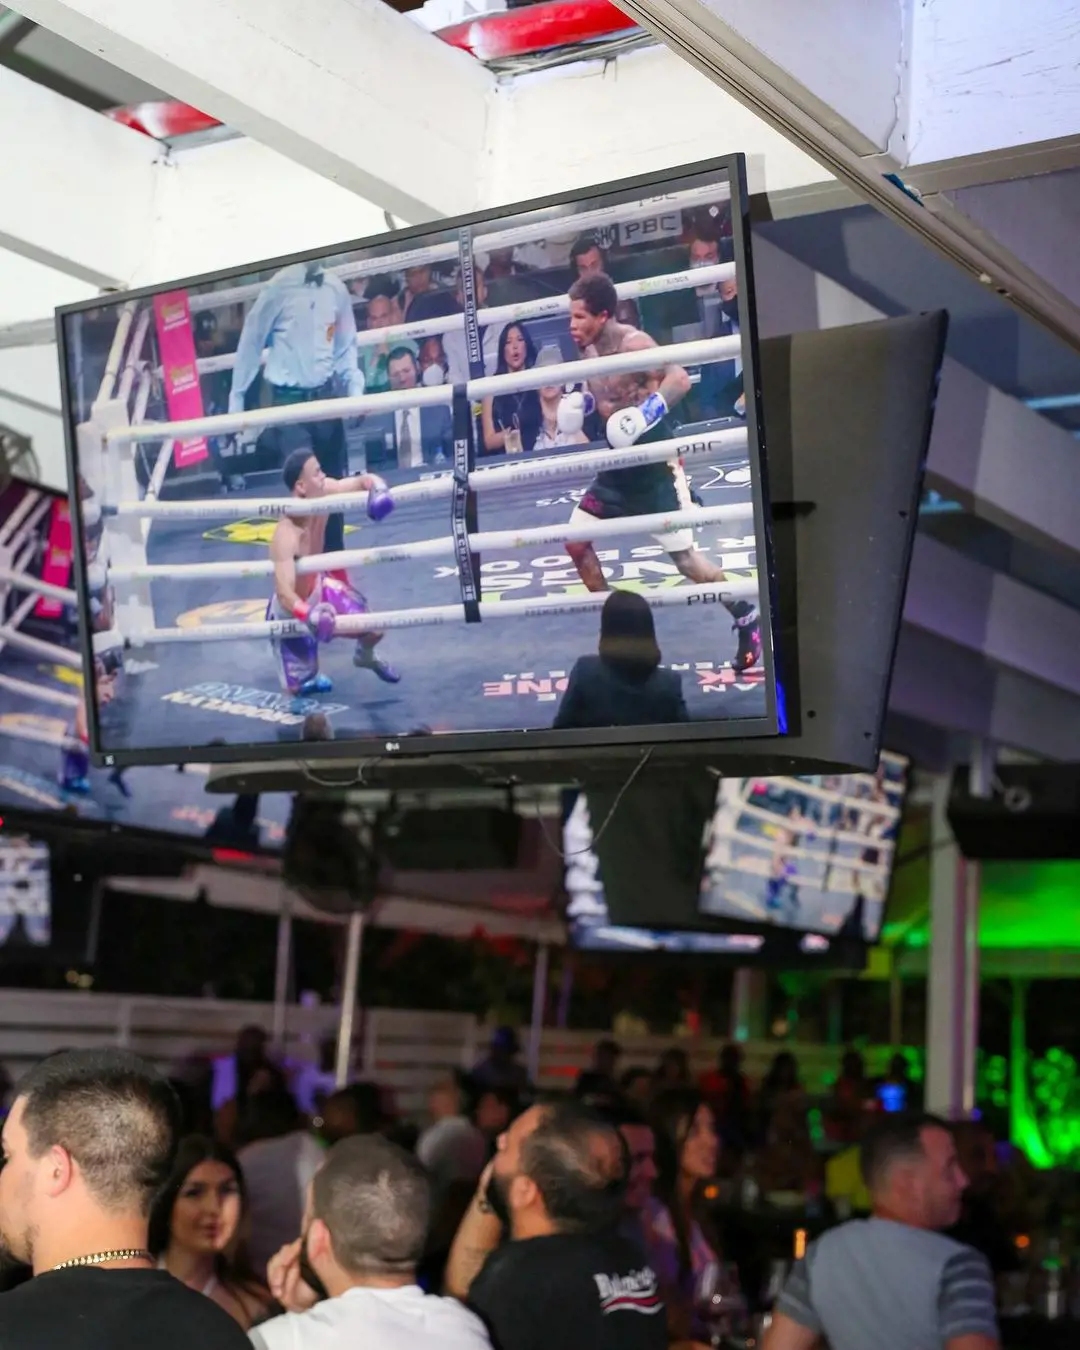 Grails Sports Bar playing the boxing game on-screen and entertaining its customers